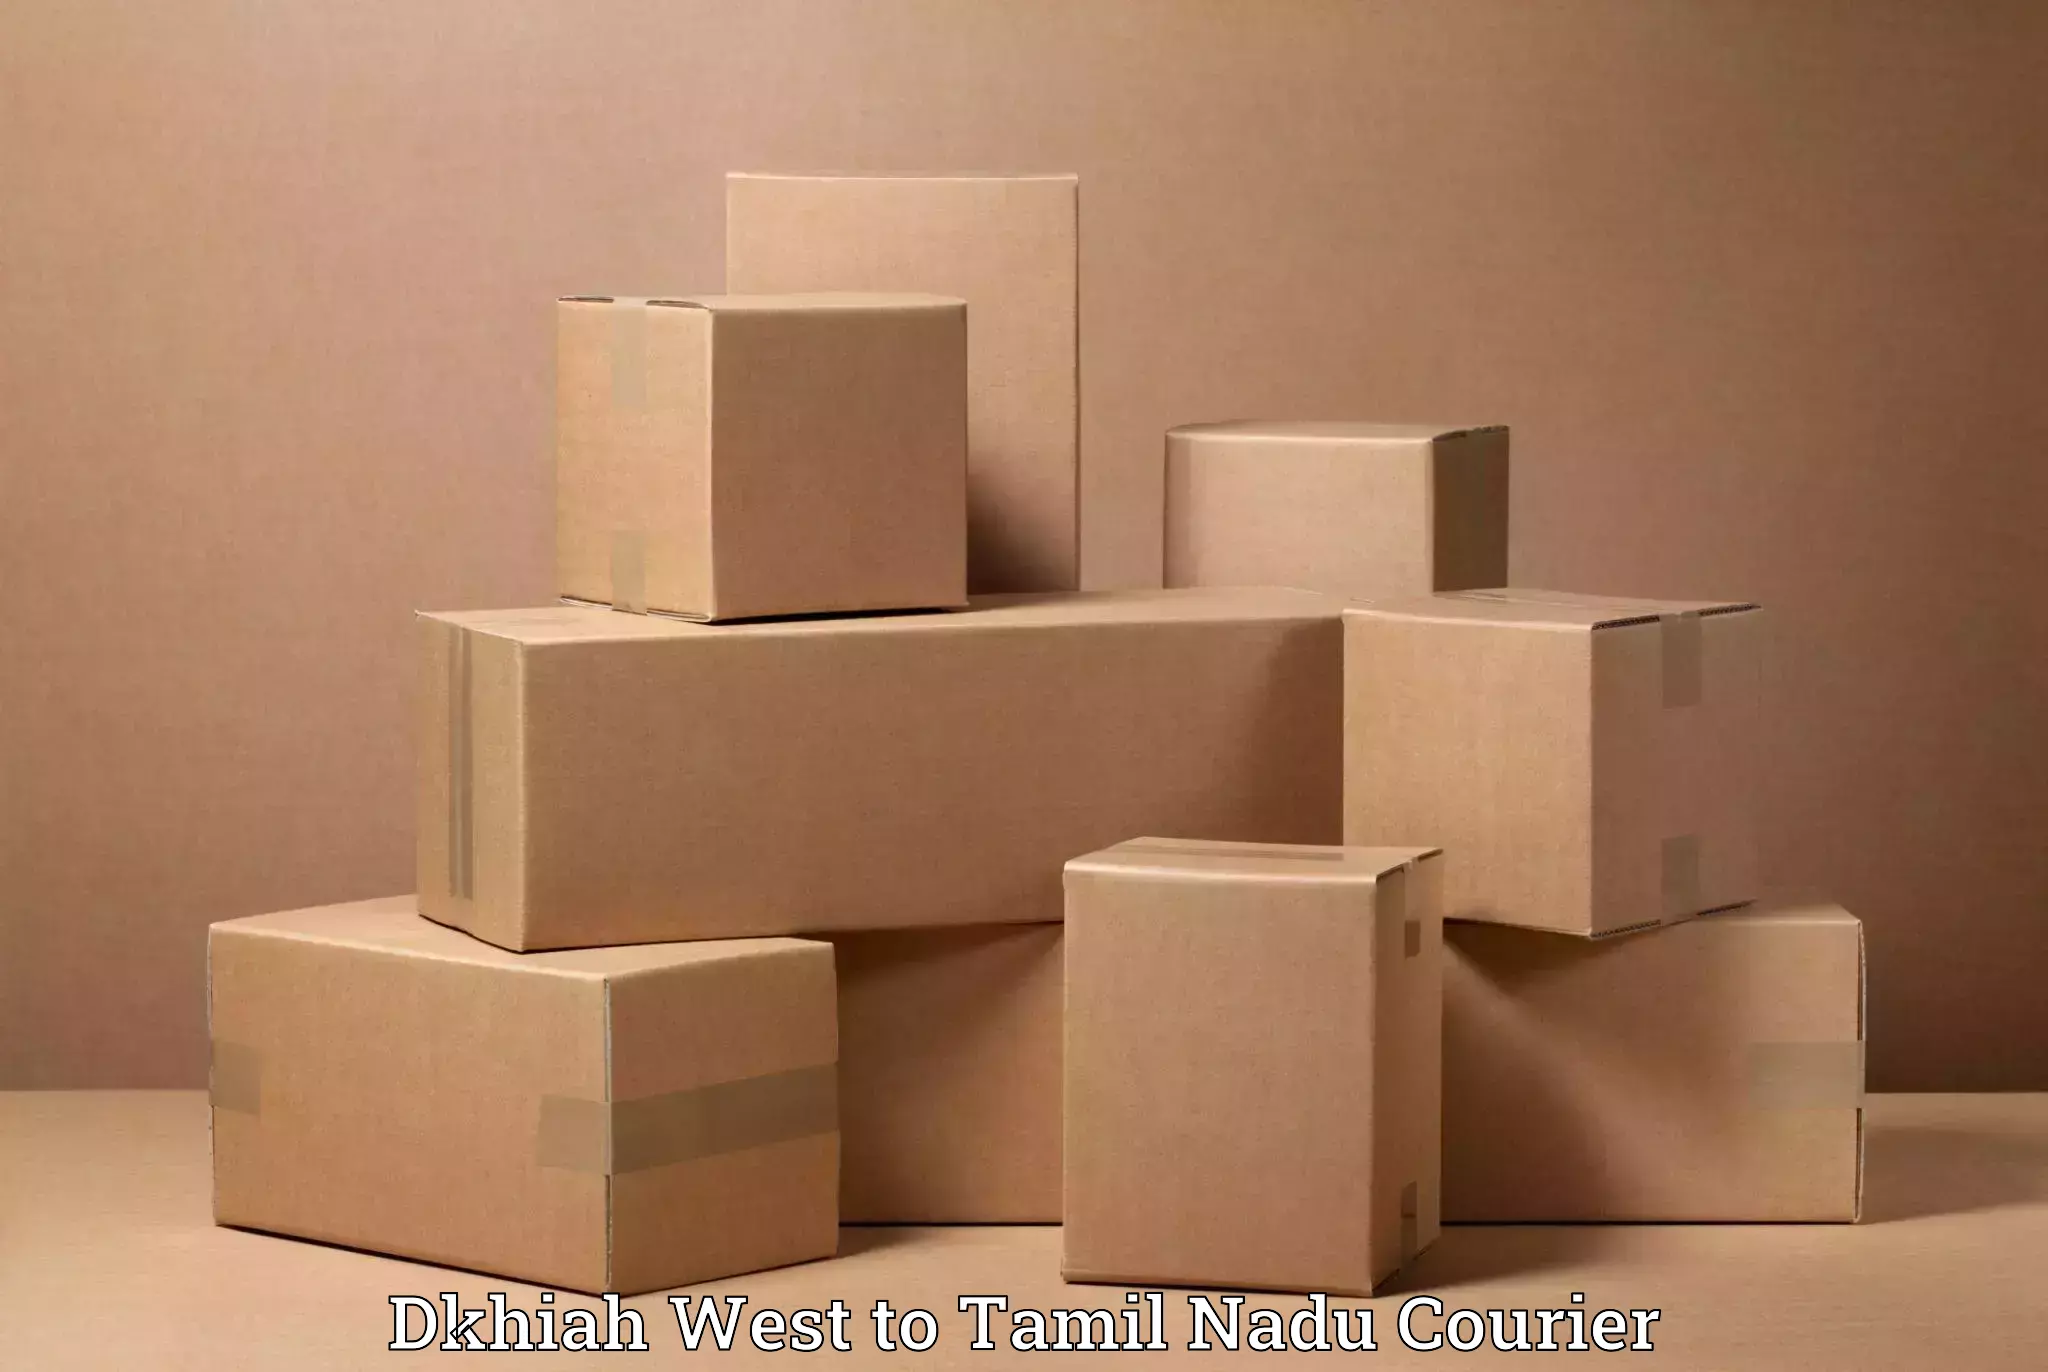 Furniture transport services Dkhiah West to Shanmugha Arts Science Technology and Research Academy Thanjavur